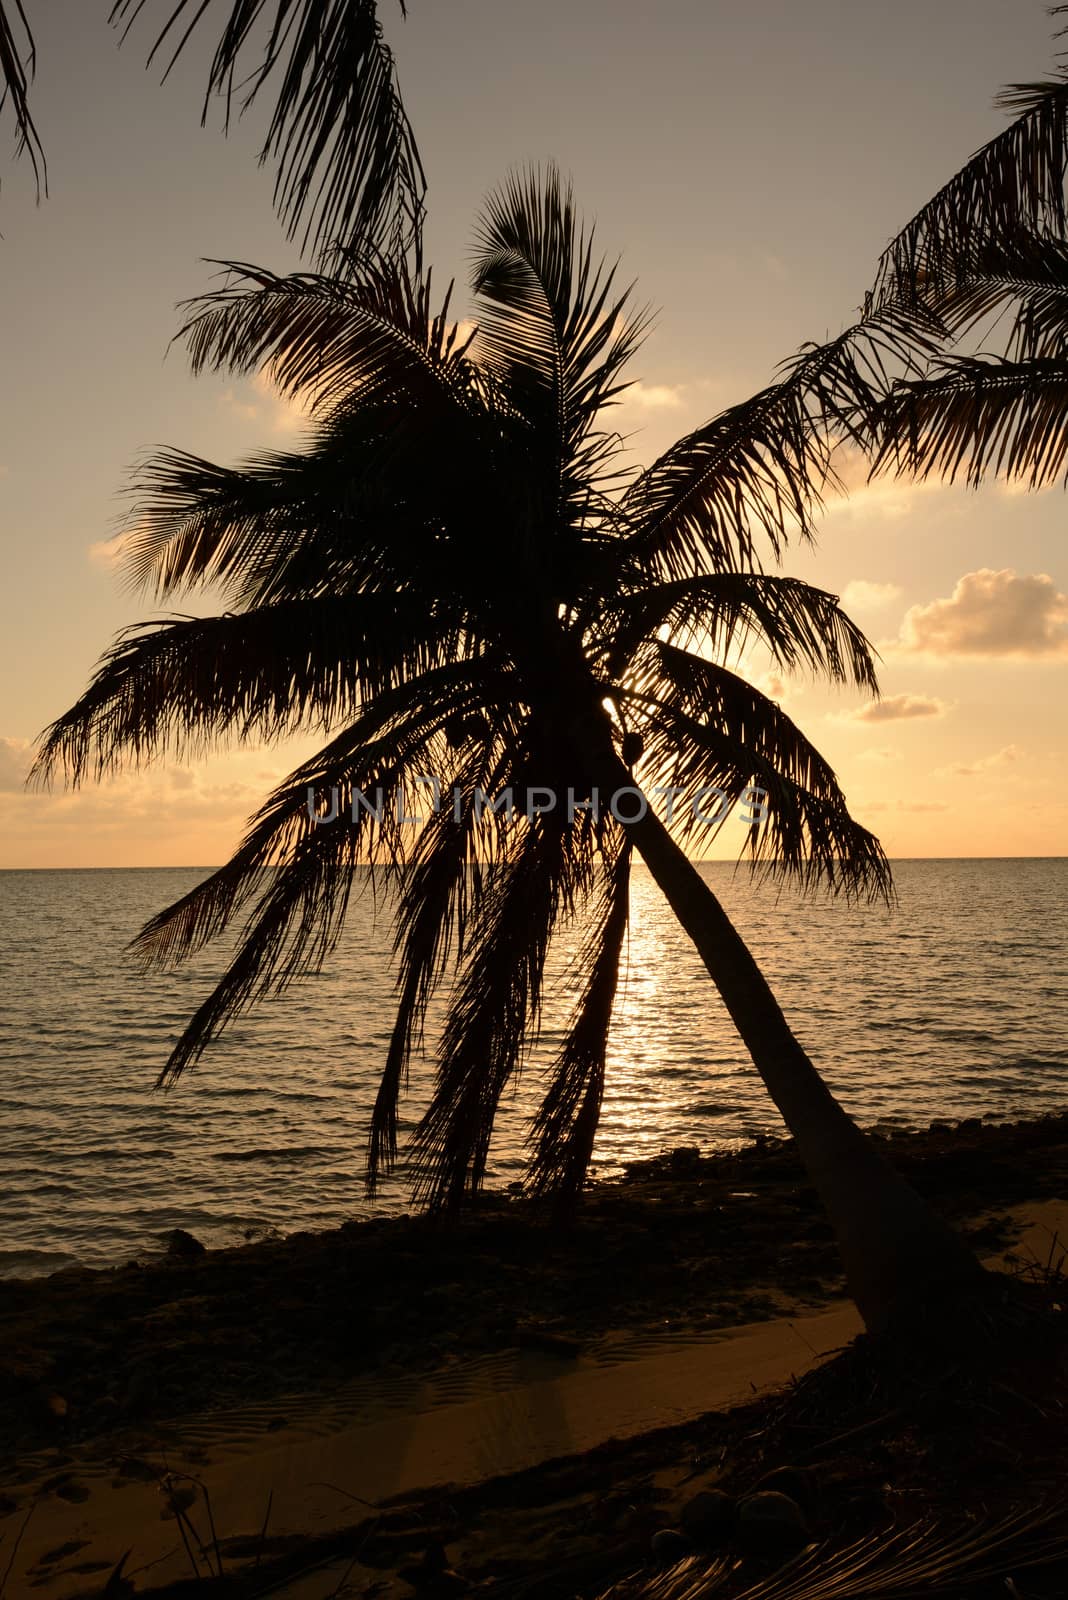 Palm tree silhouette in tropical location by ftlaudgirl